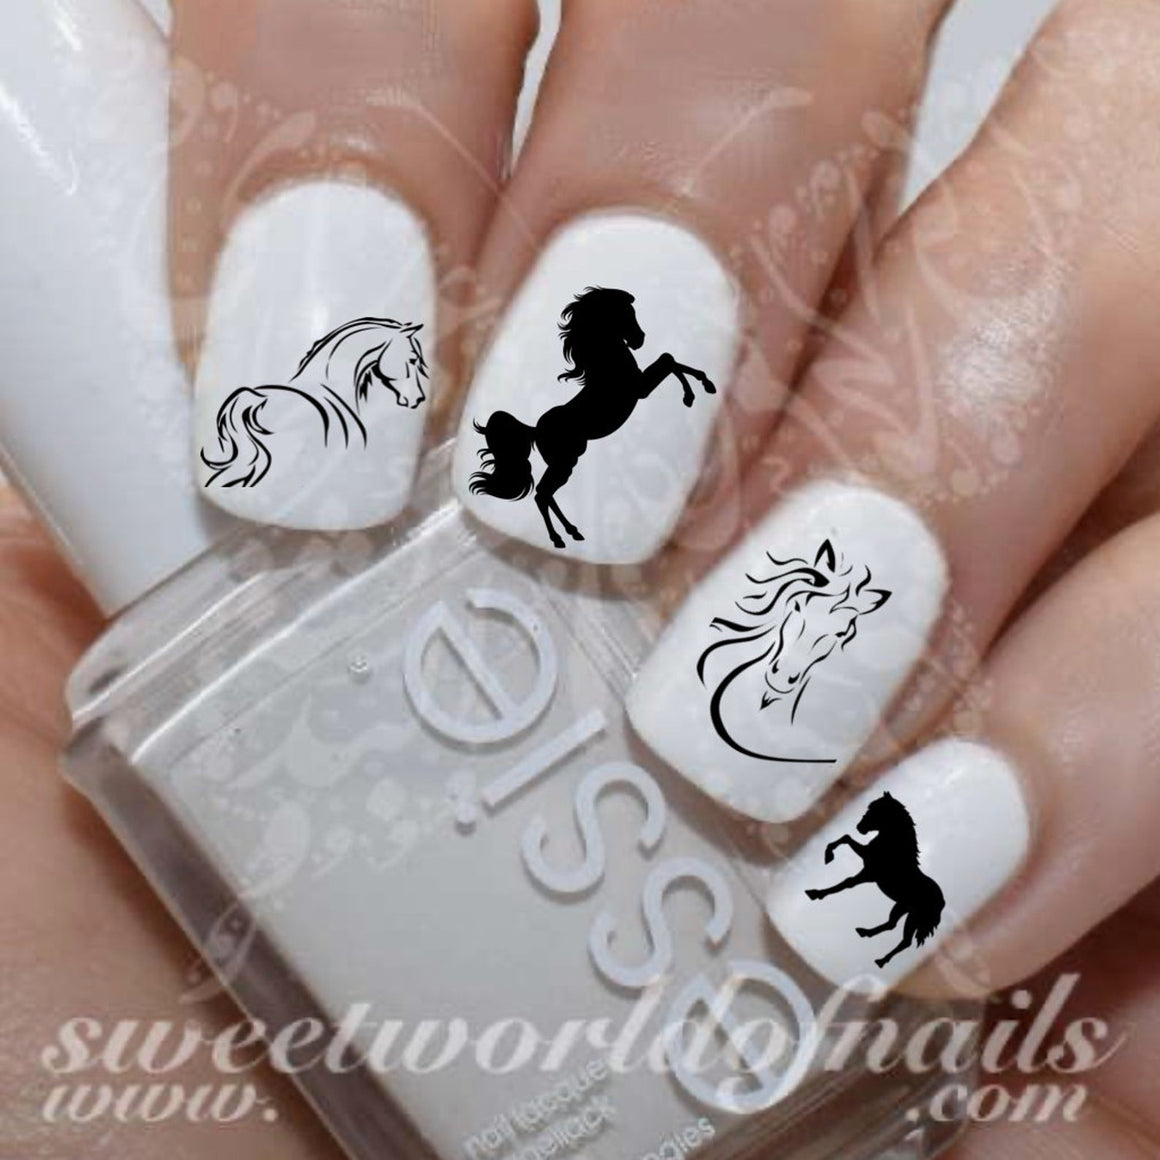 Horse Nail Art Water Decals Transfers Wraps